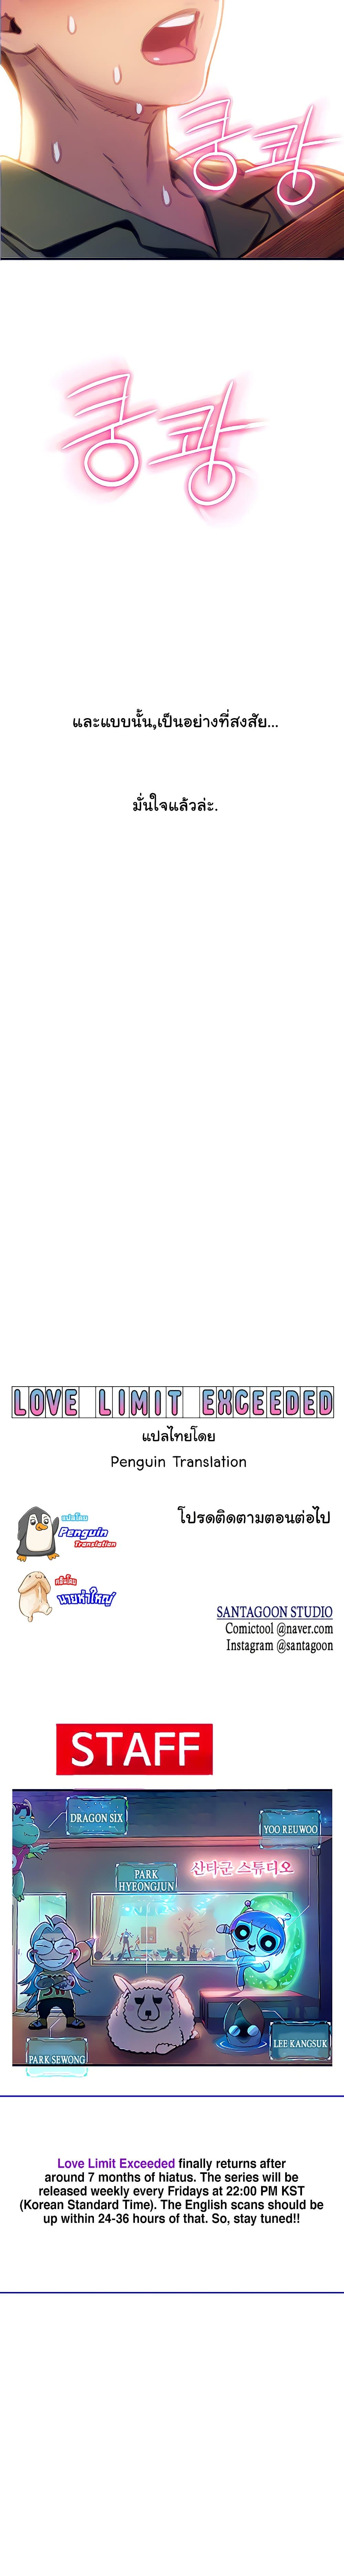 Love Limit Exceeded 10-10